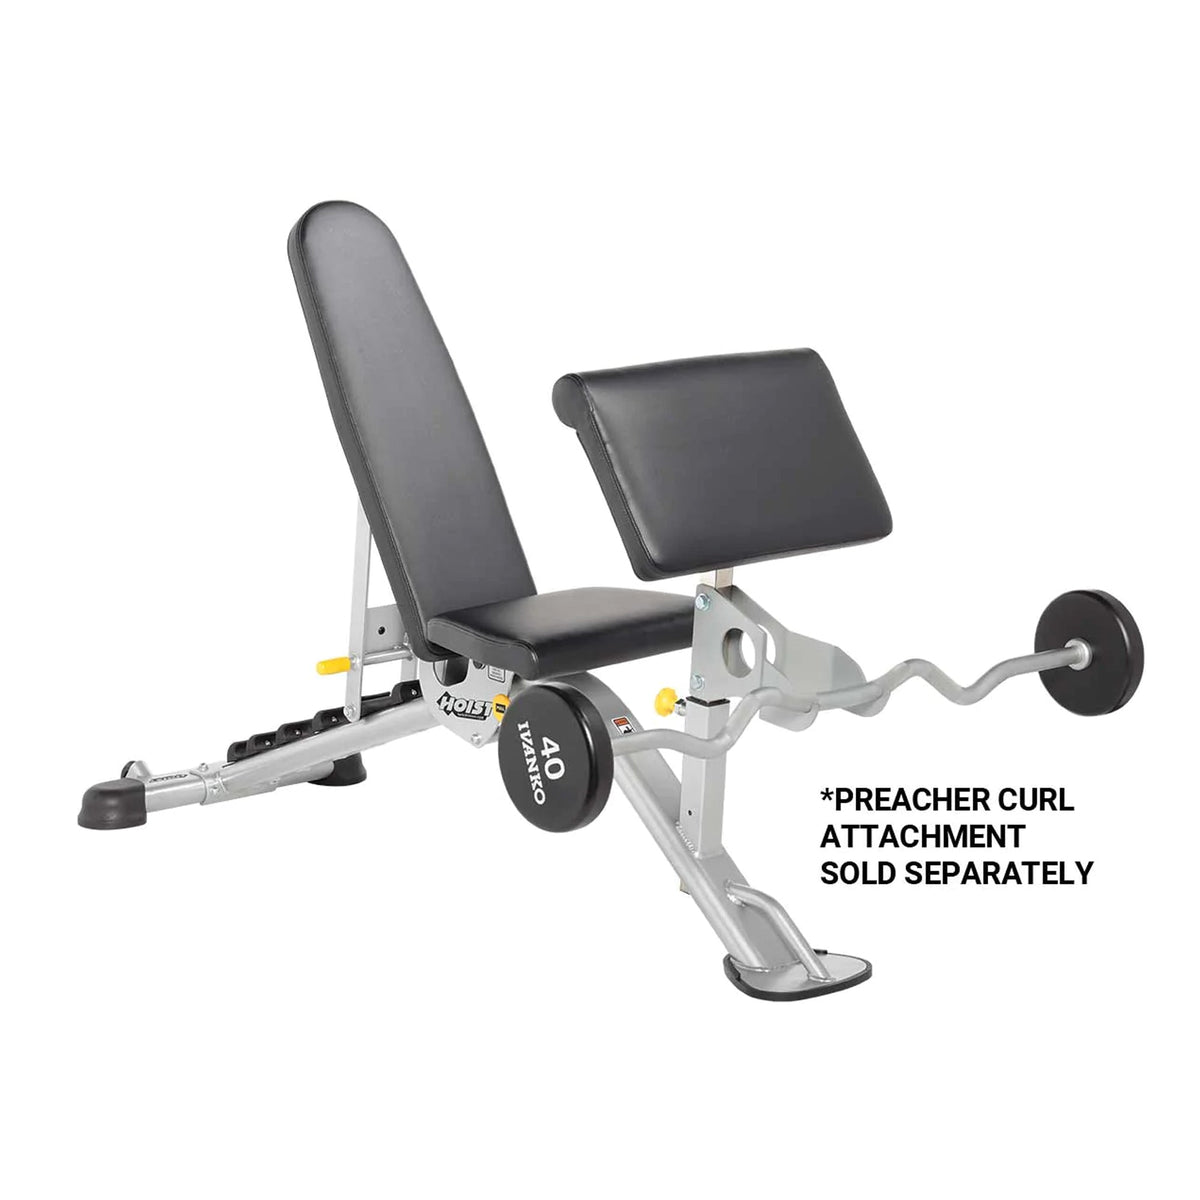 Hoist Fitness HF-5165 7 Position FID Bench with optional preacher curl and accessory storage stand | Fitness Experience